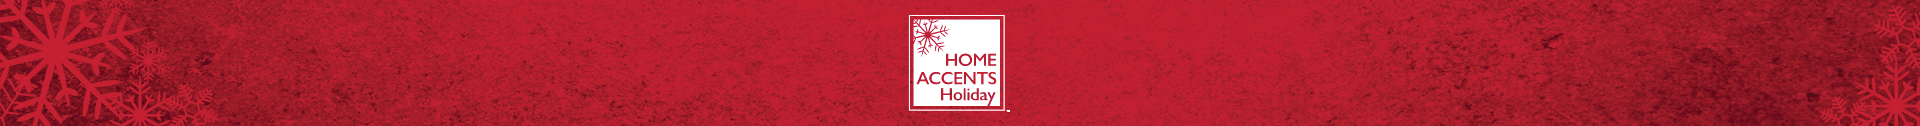 Home Accents Holiday Brand Banner